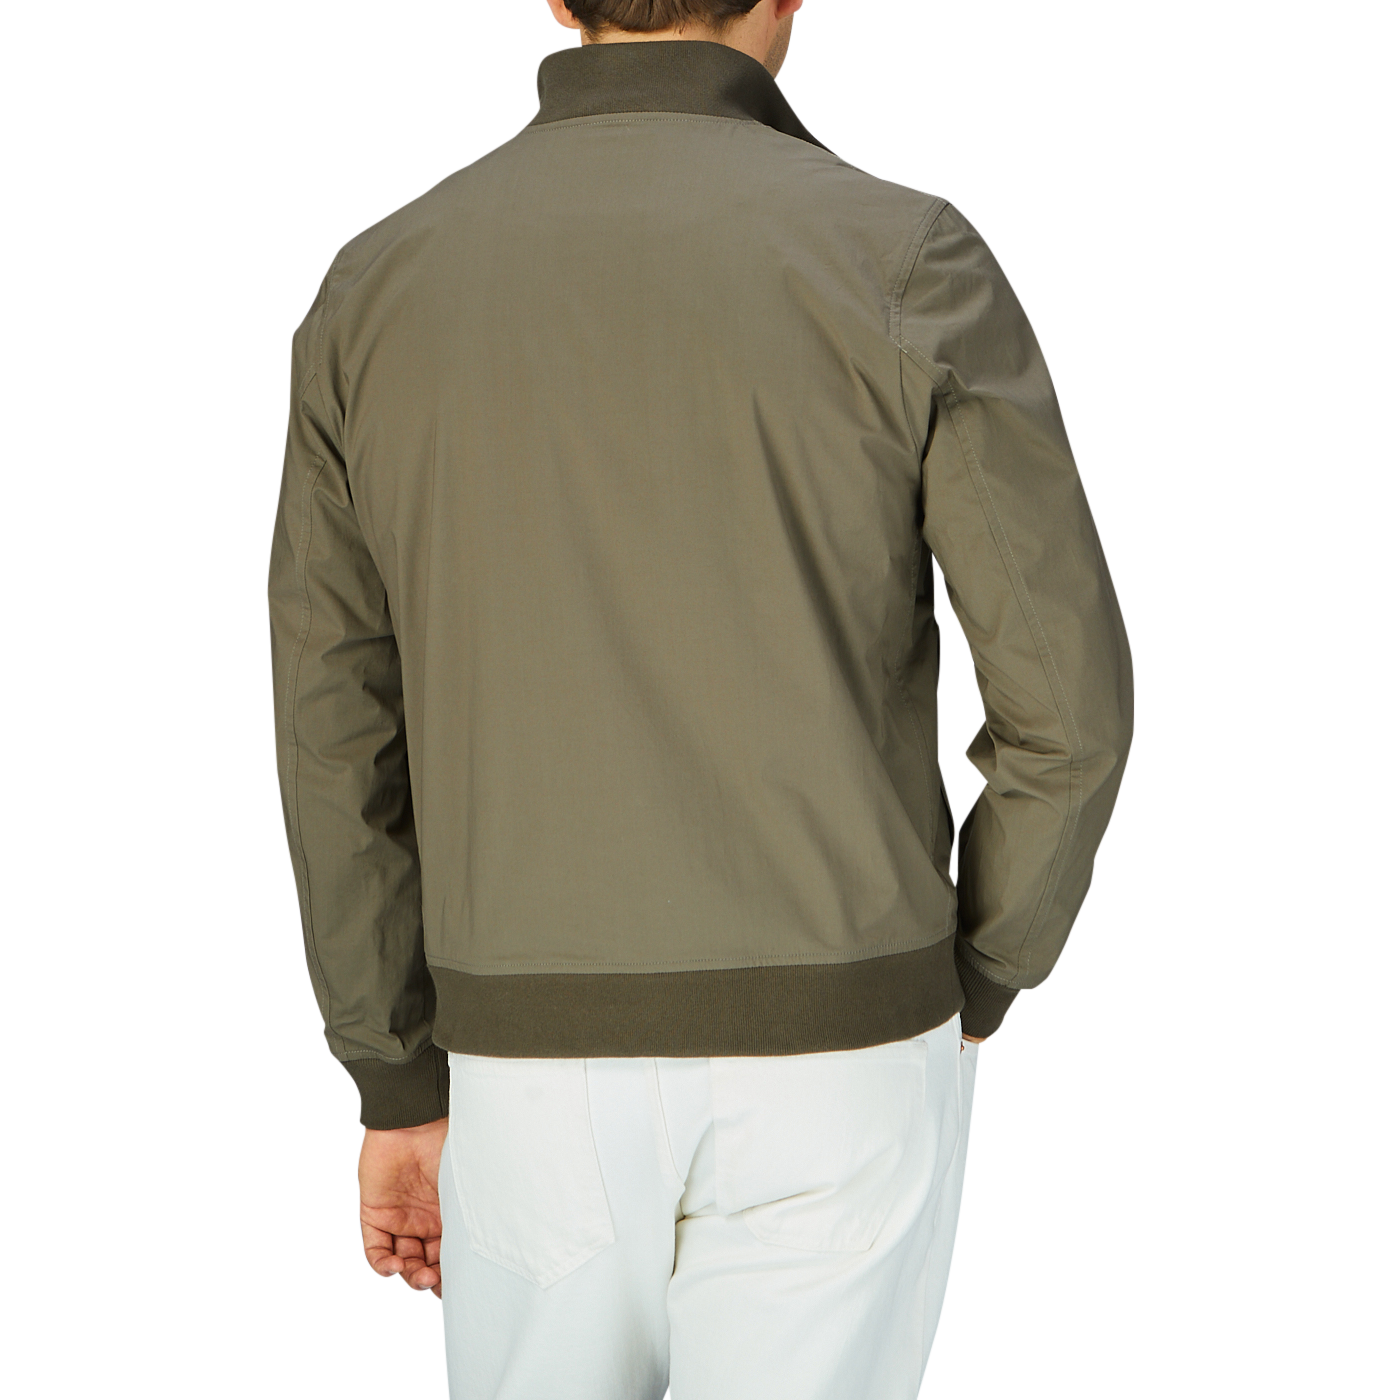 Man wearing an olive green cotton ripstop Valstar jacket with a ribbed collar and white trousers, viewed from the back.